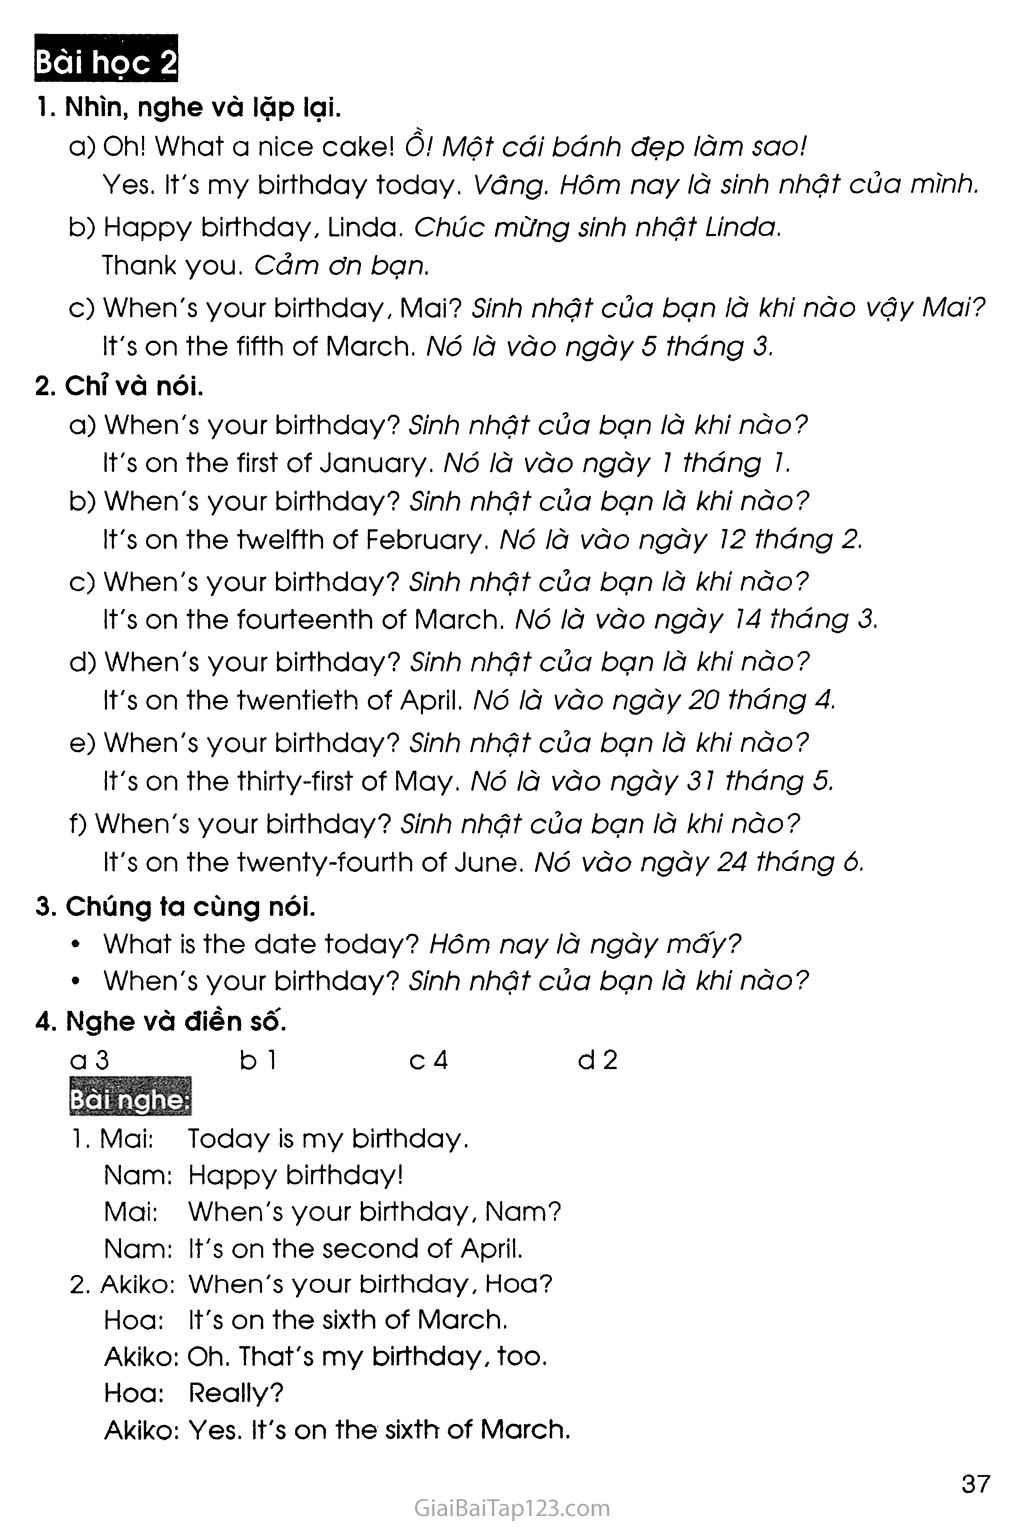 UNIT 4: WHEN’S YOUR BIRTHDAY? trang 5